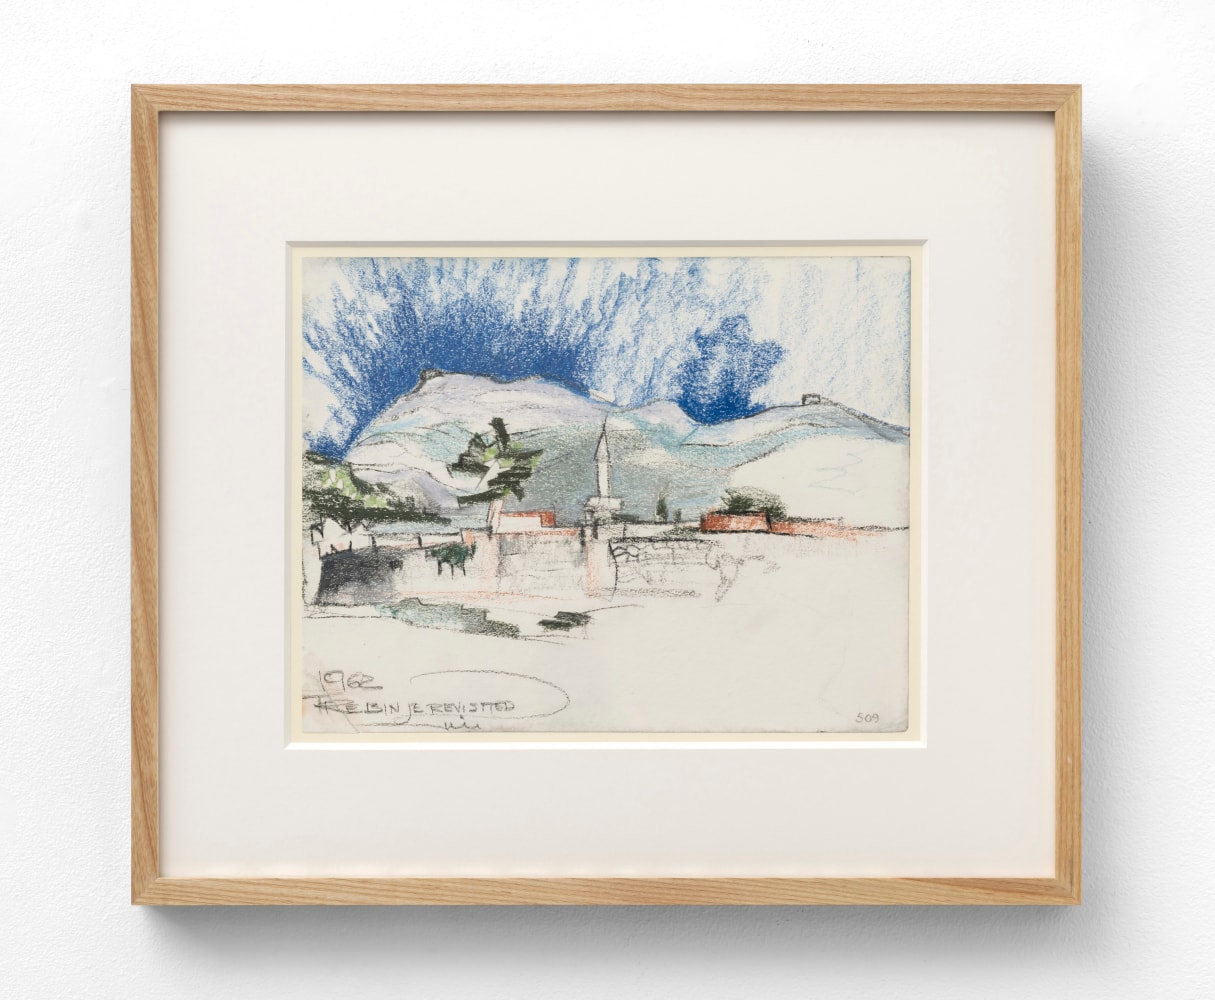 Richard Neutra (1892-1970) Trebinje Revisited, Bosnia and Herzegovina, 1962     charcoal and pastel on paper 9 x 11 1/2 inches;  22.9 x 29.2 centimeters LSFA# 15376